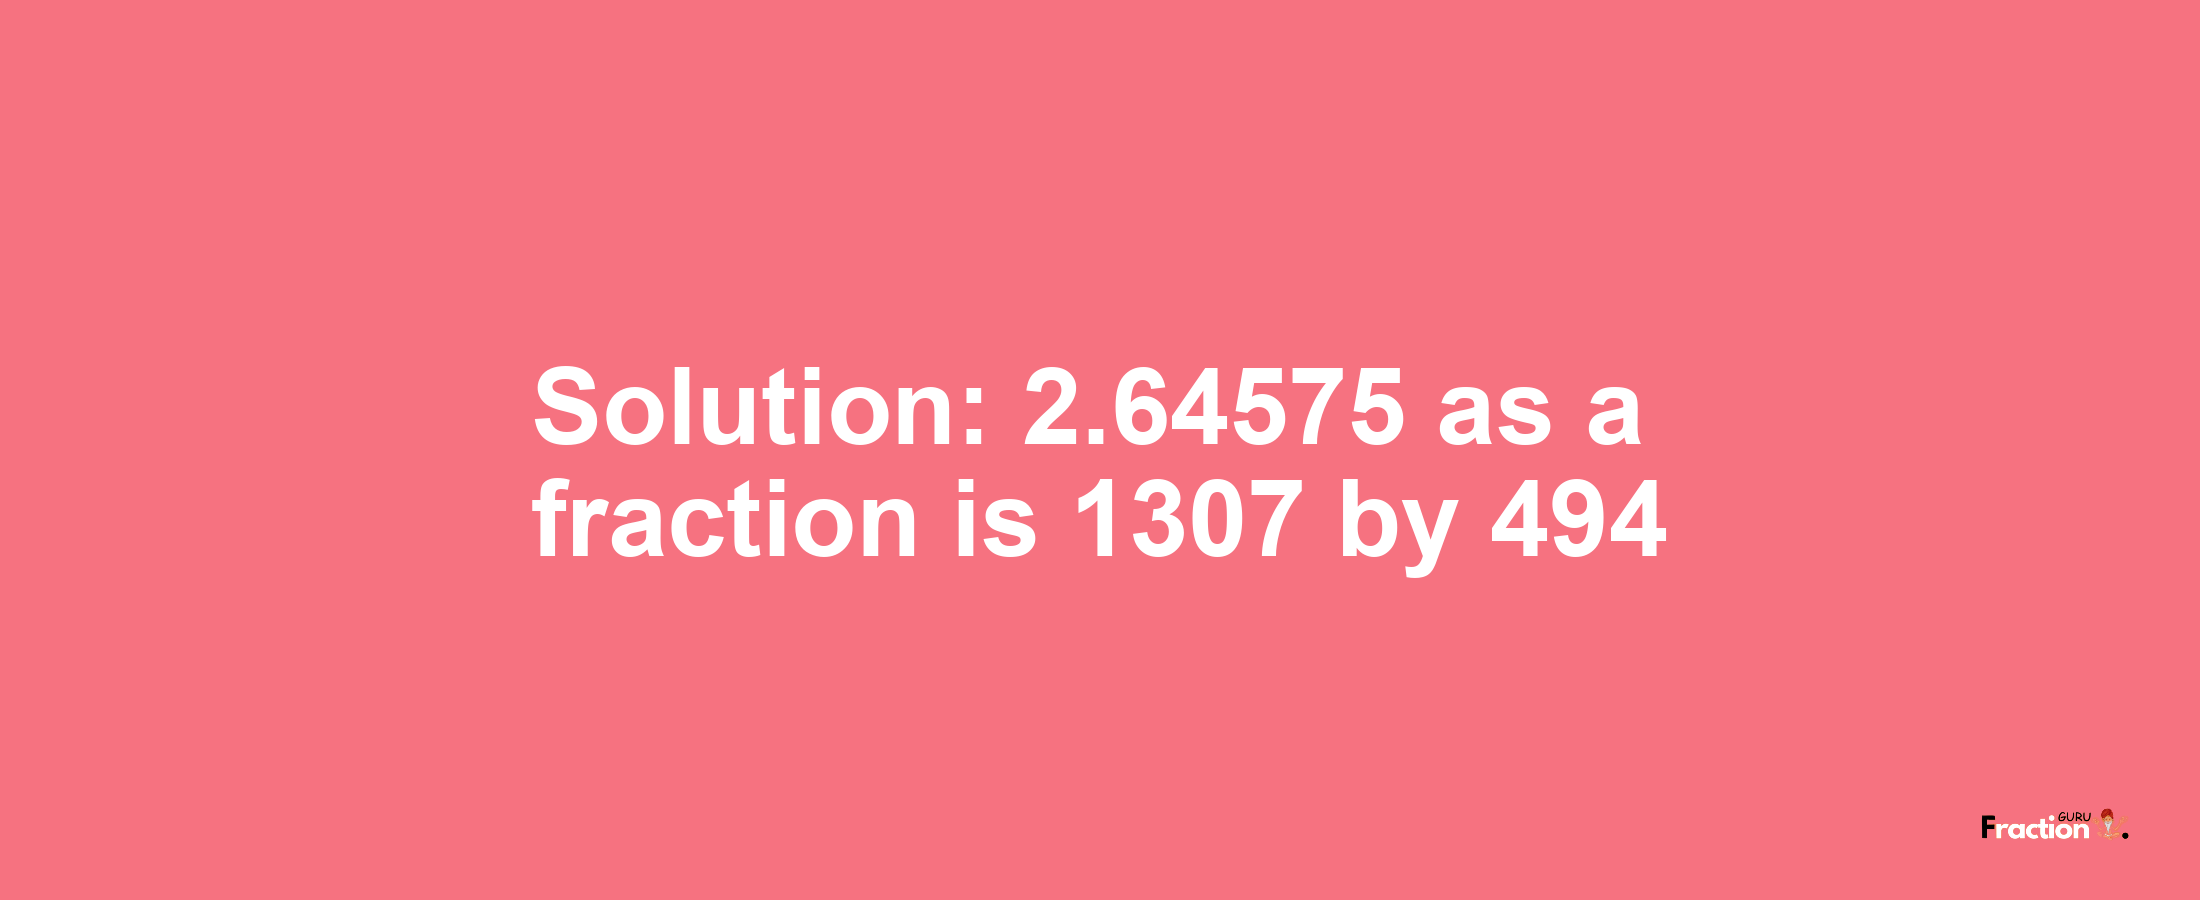 Solution:2.64575 as a fraction is 1307/494